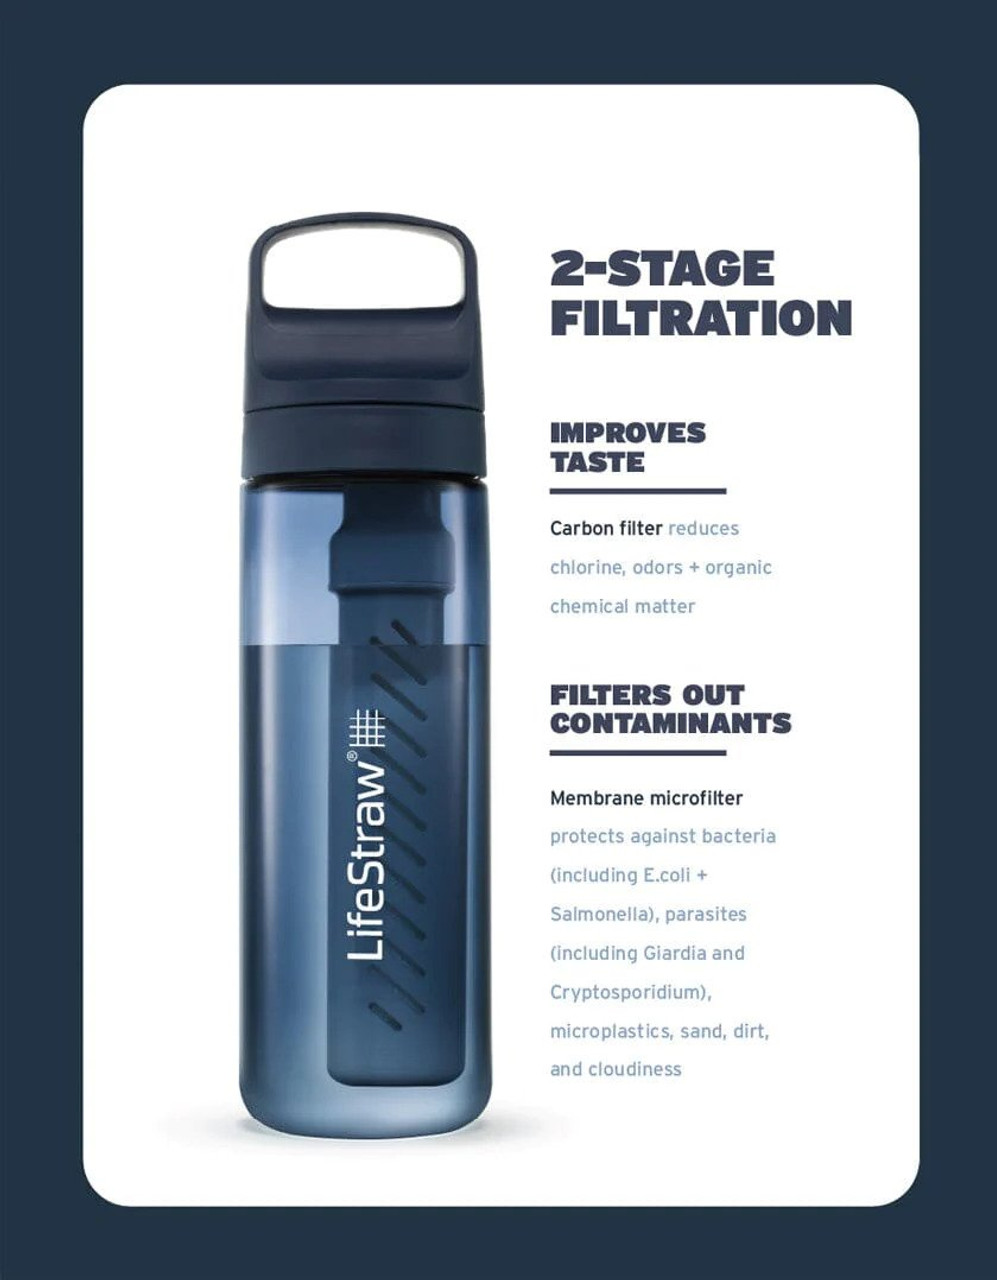 https://cdn11.bigcommerce.com/s-ovptlwt64t/images/stencil/1280x1280/products/857/4026/LIFESTRAW-GO-SERIES-22OZ-3__58165.1683079488.jpg?c=1?imbypass=on